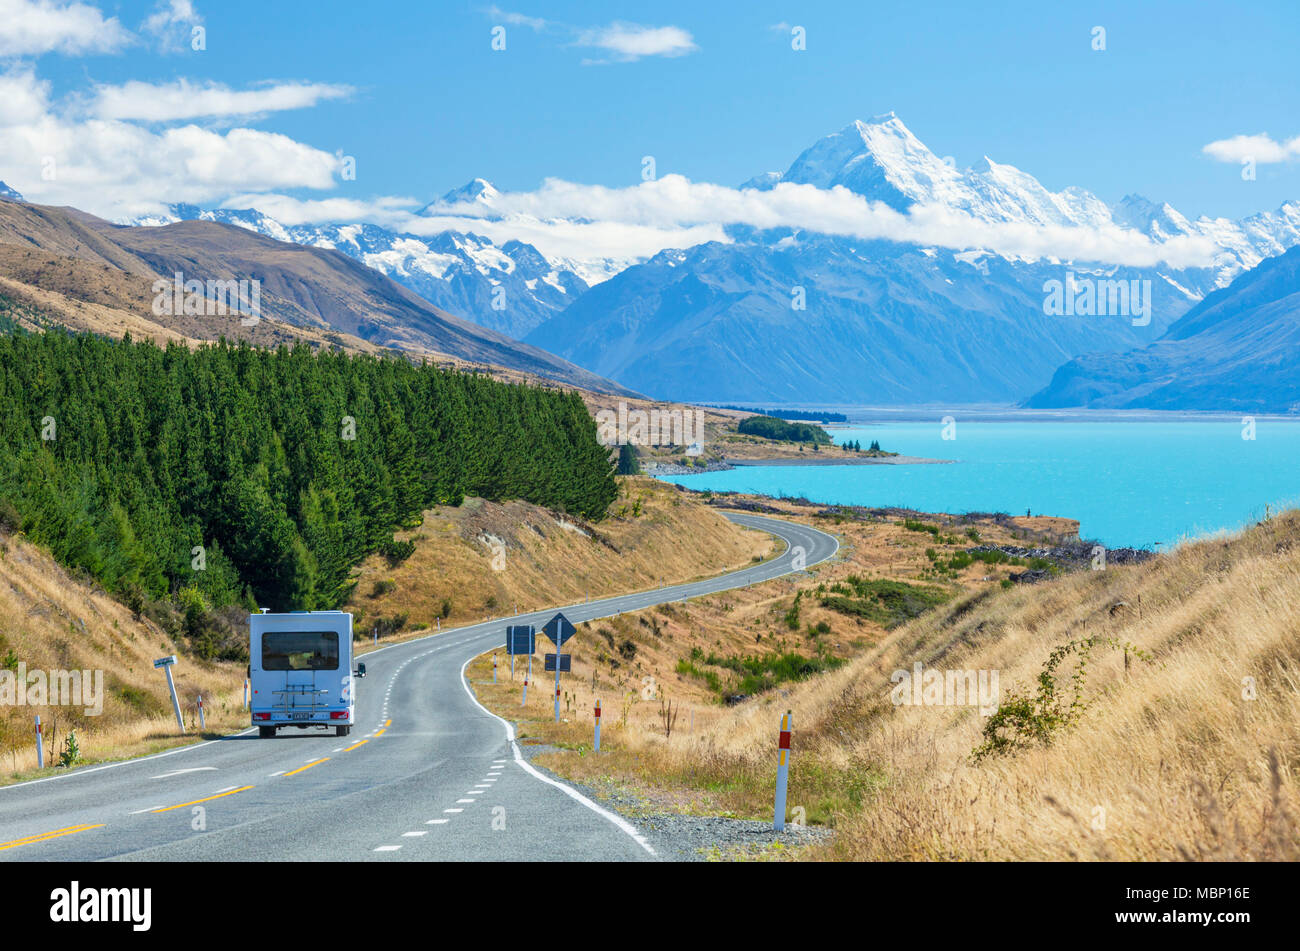 new zealand south island new zealand motor home travelling on a winding road to mount cook national park by the side of lake pukaki new zealand nz Stock Photo